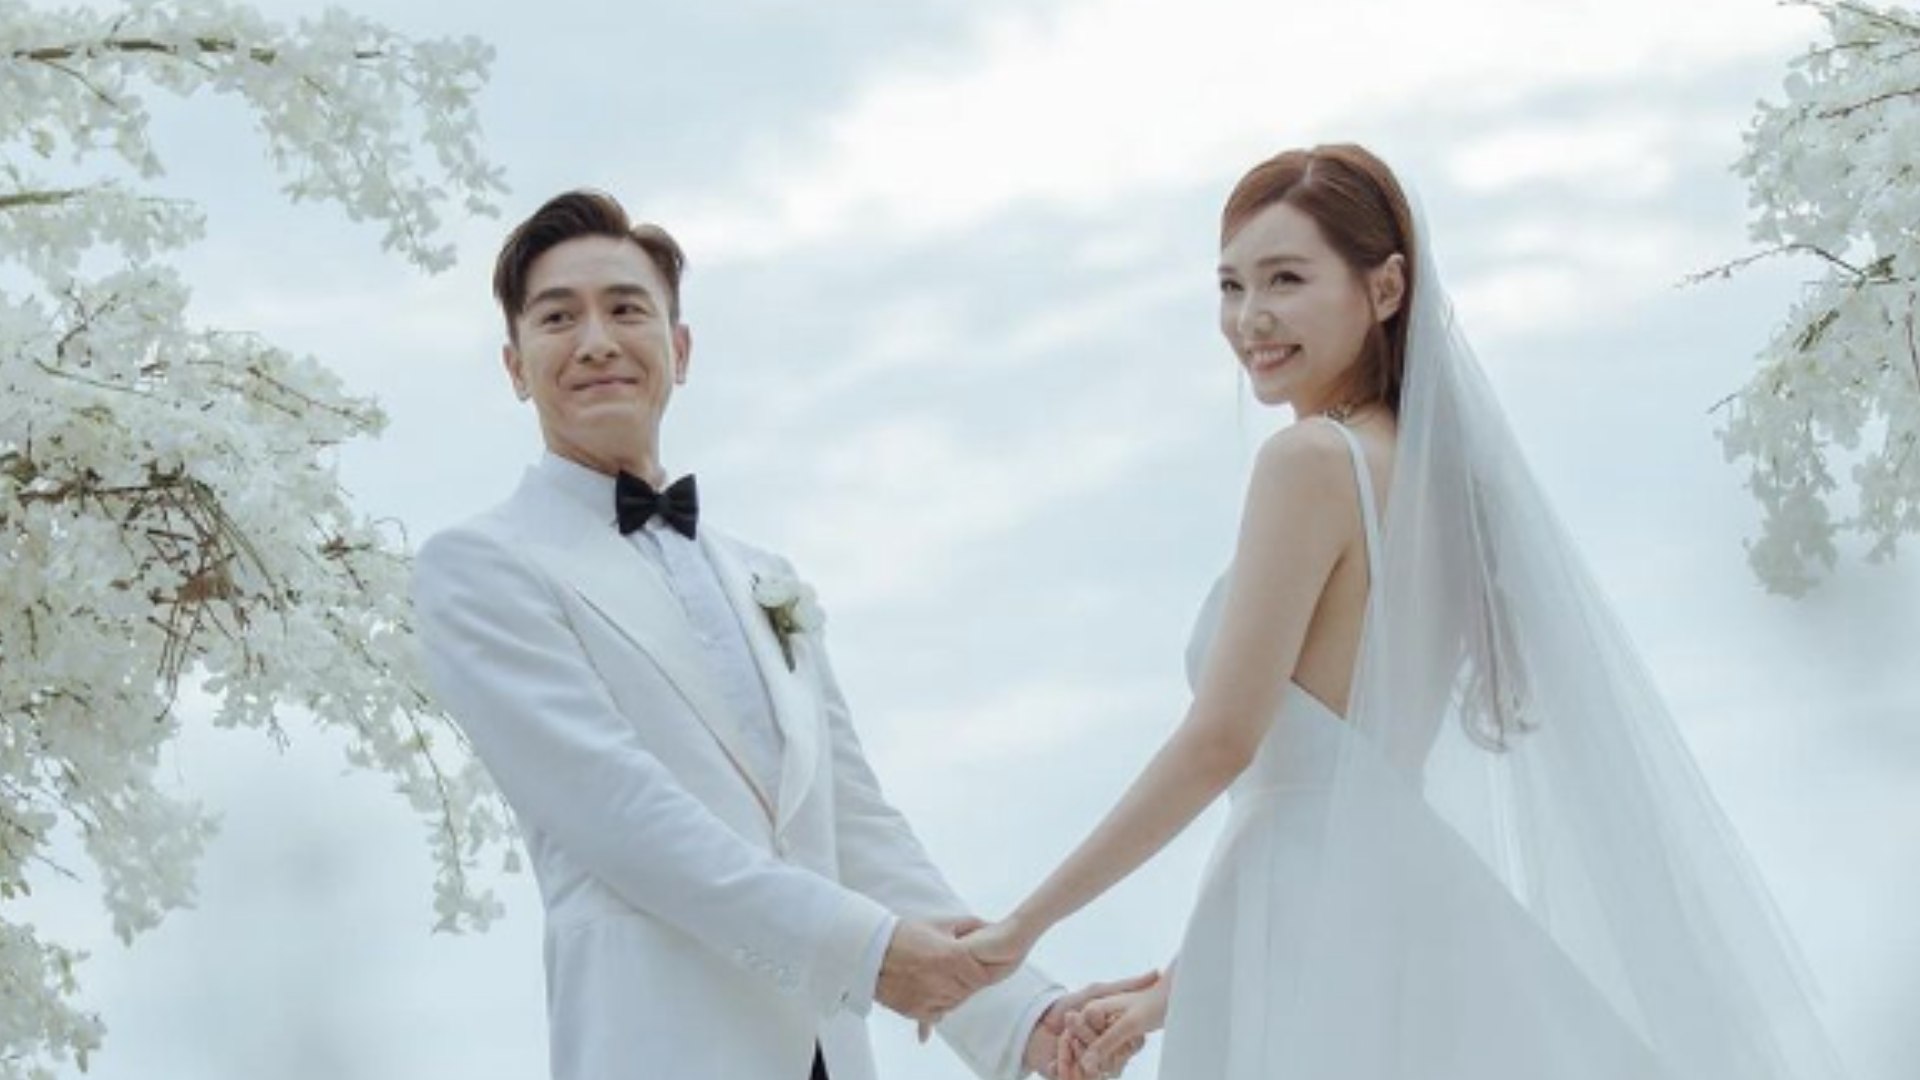 Kenneth Ma and Roxanne Tong got married!